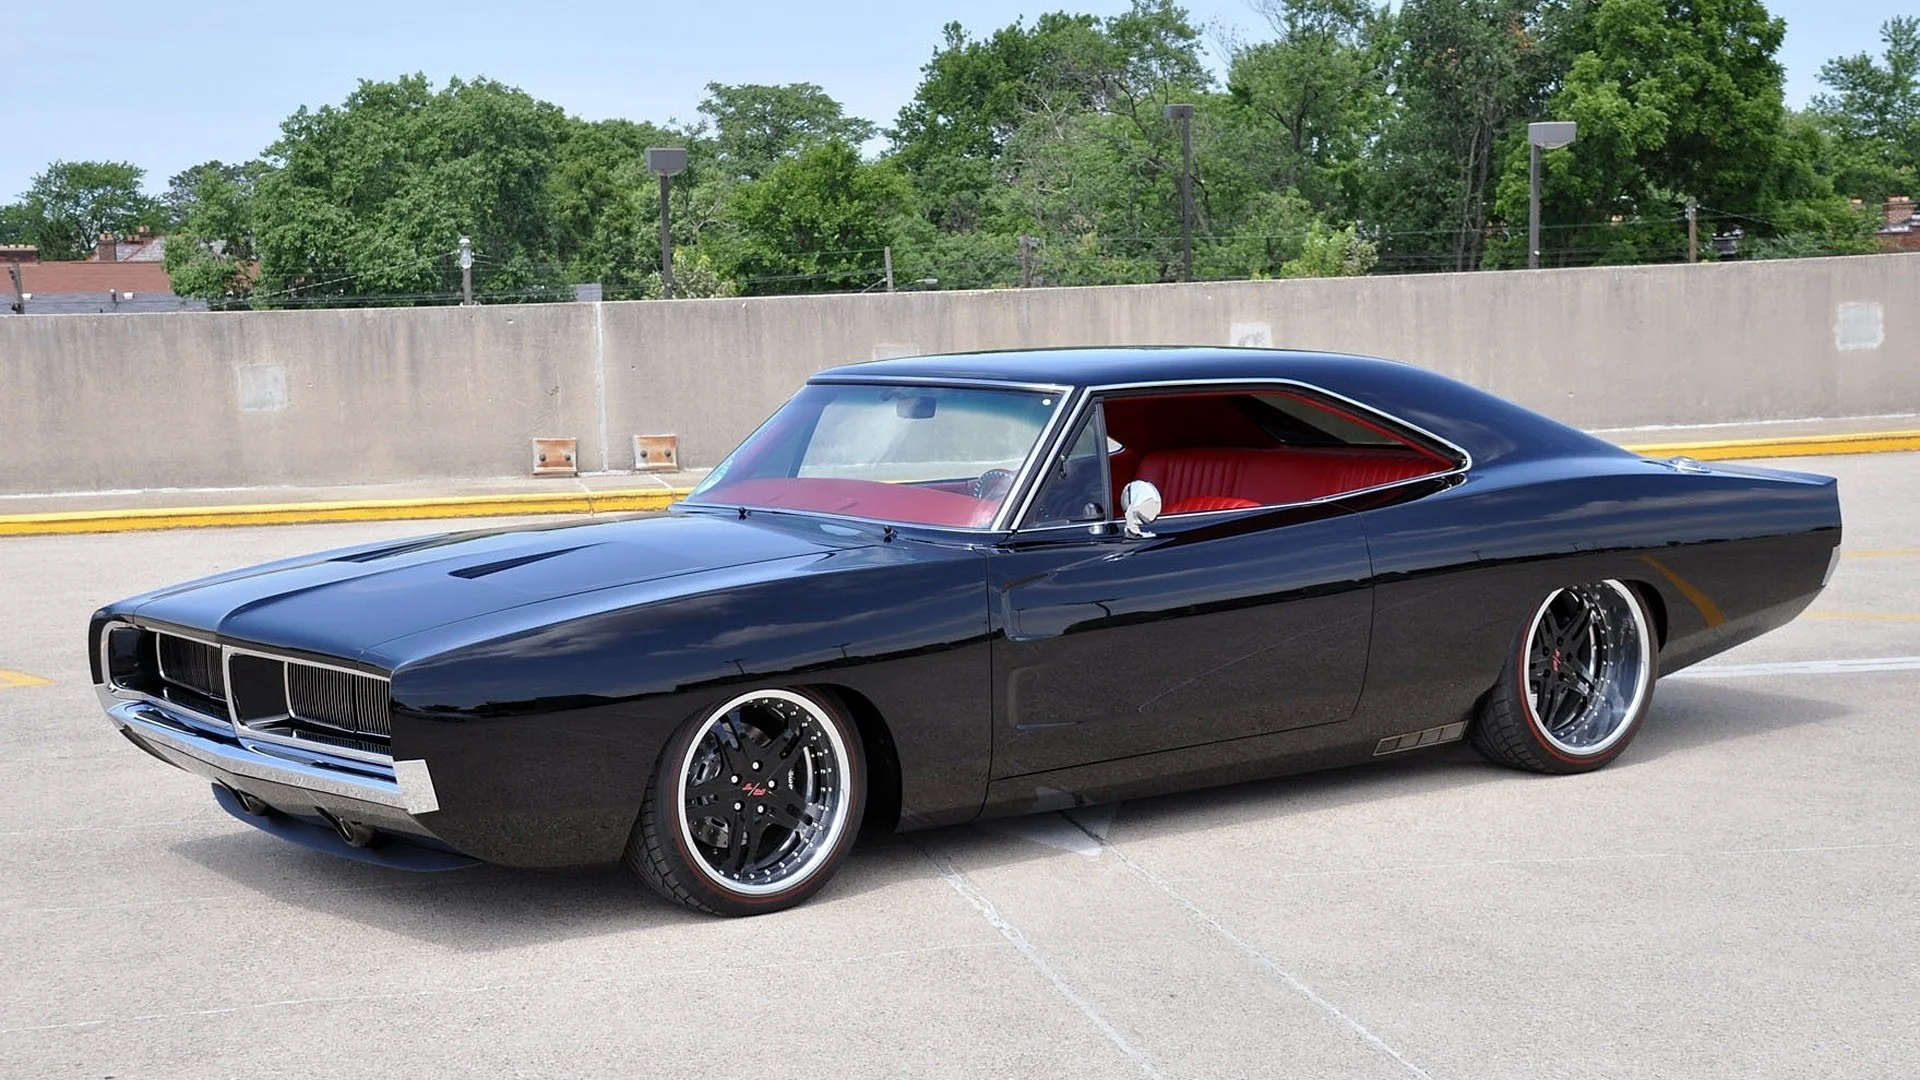 1969 Dodge Charger R/T custom tuning muscle cars hot rod wallpaper .